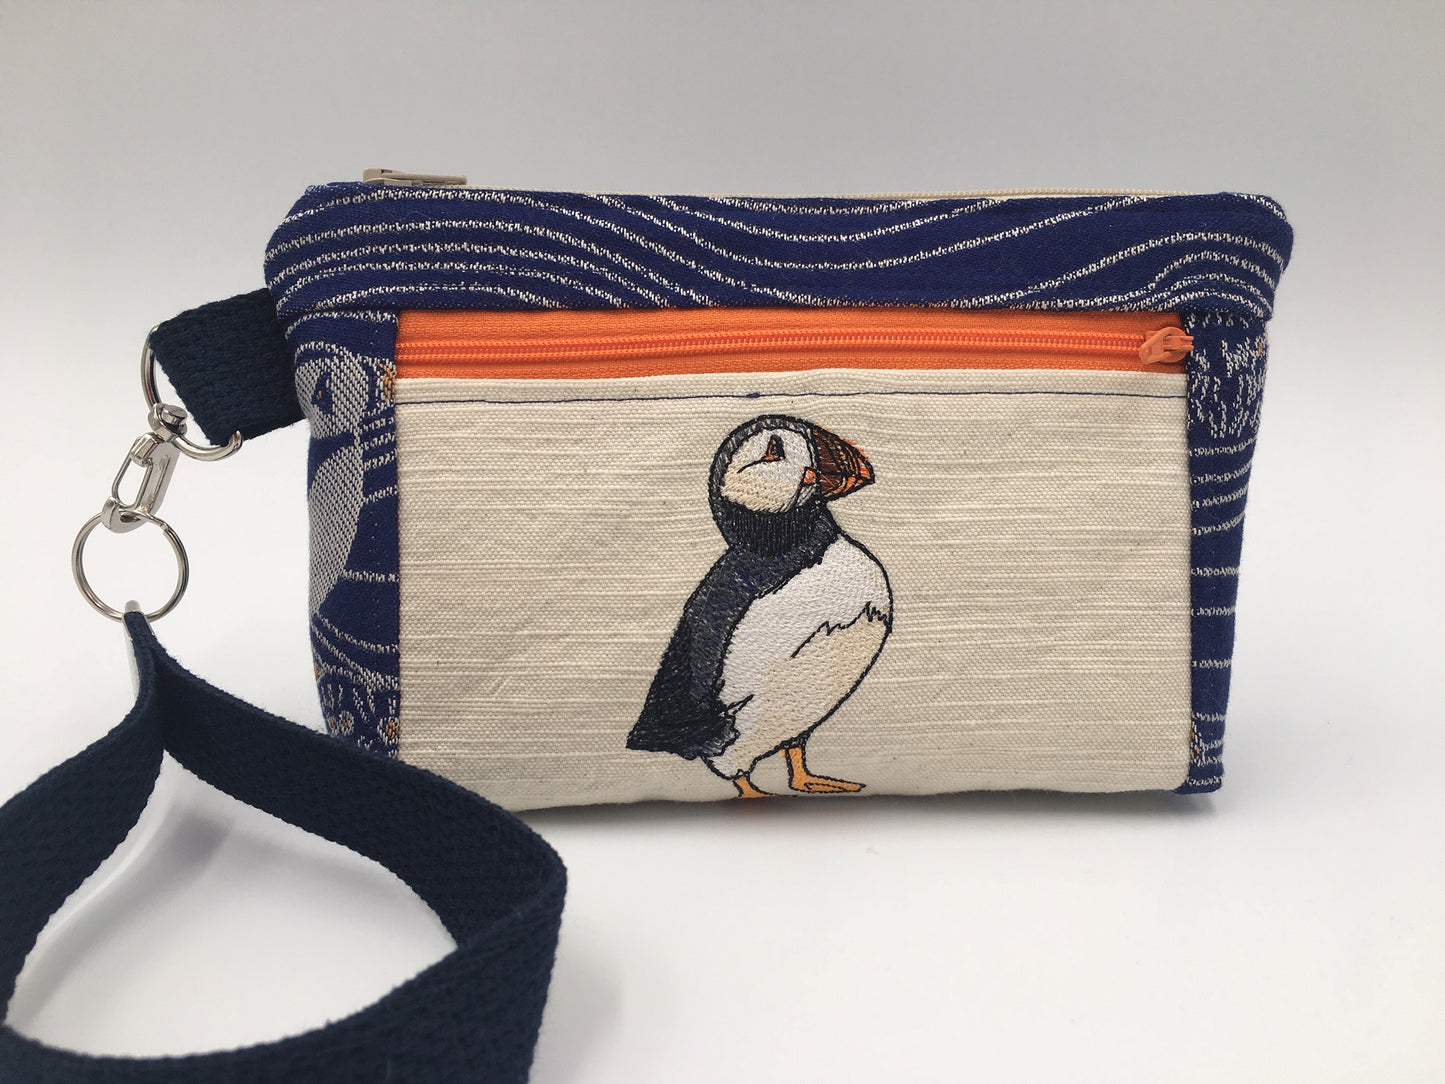 Puffin Rock Jacquard and Embroidery Double Pocket Zipper Clutch